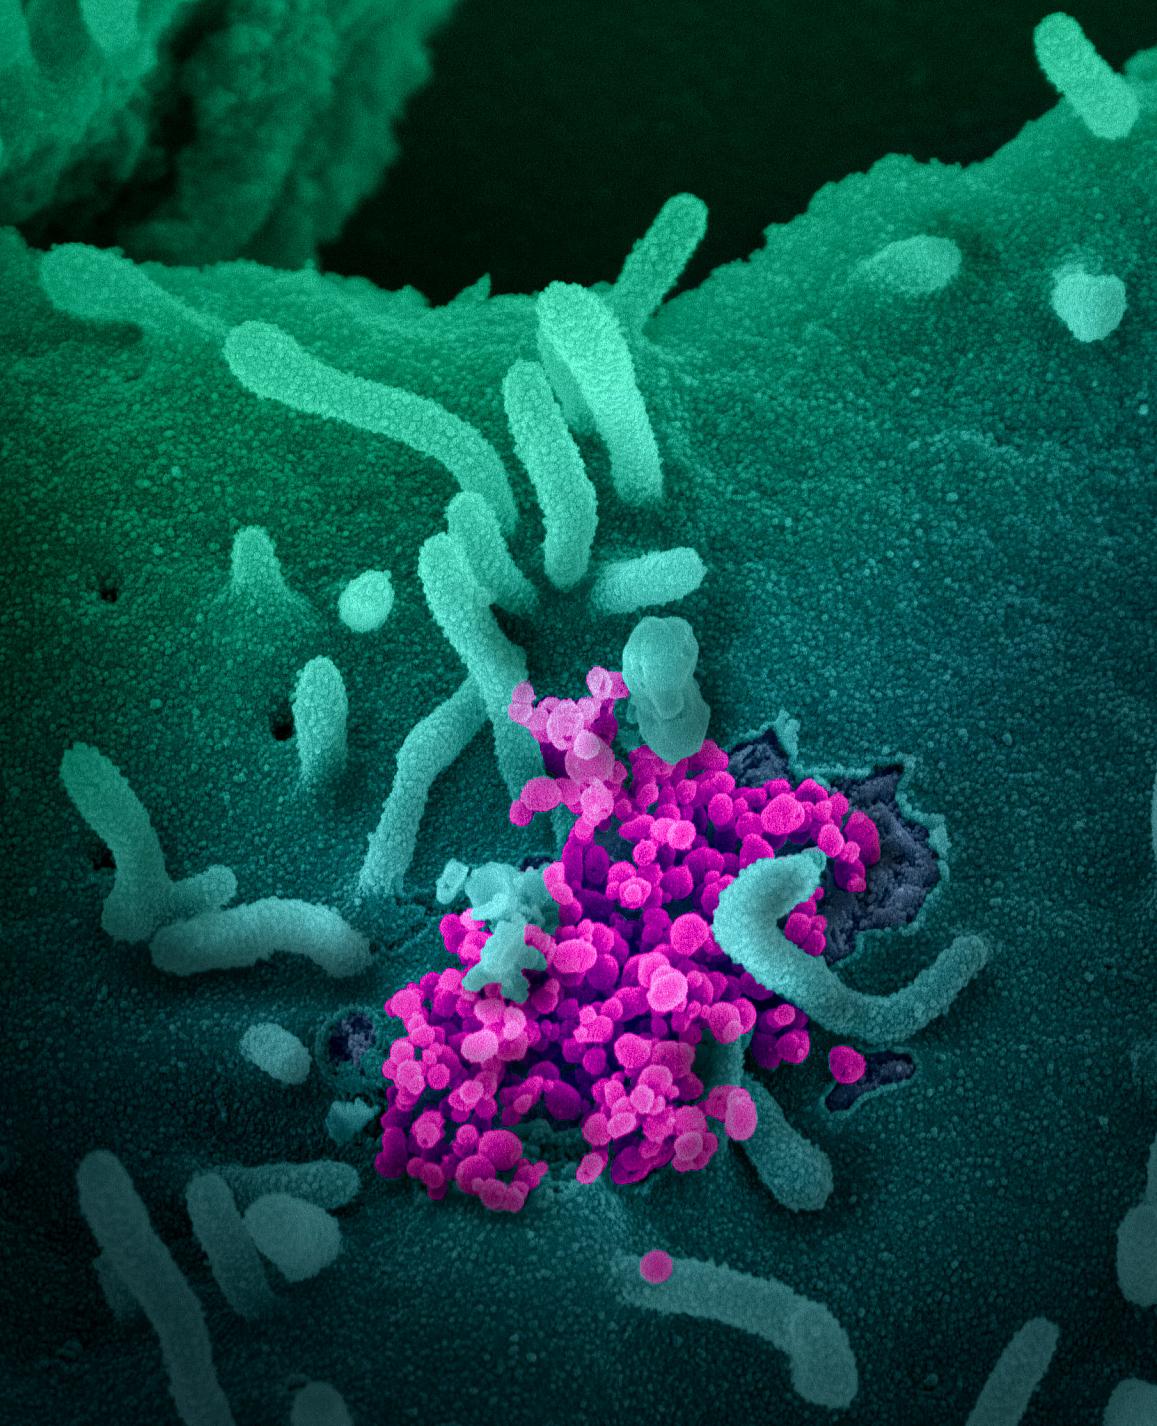 SARS-CoV-2, coronavirus, emerging from a cell cultured in a lab.